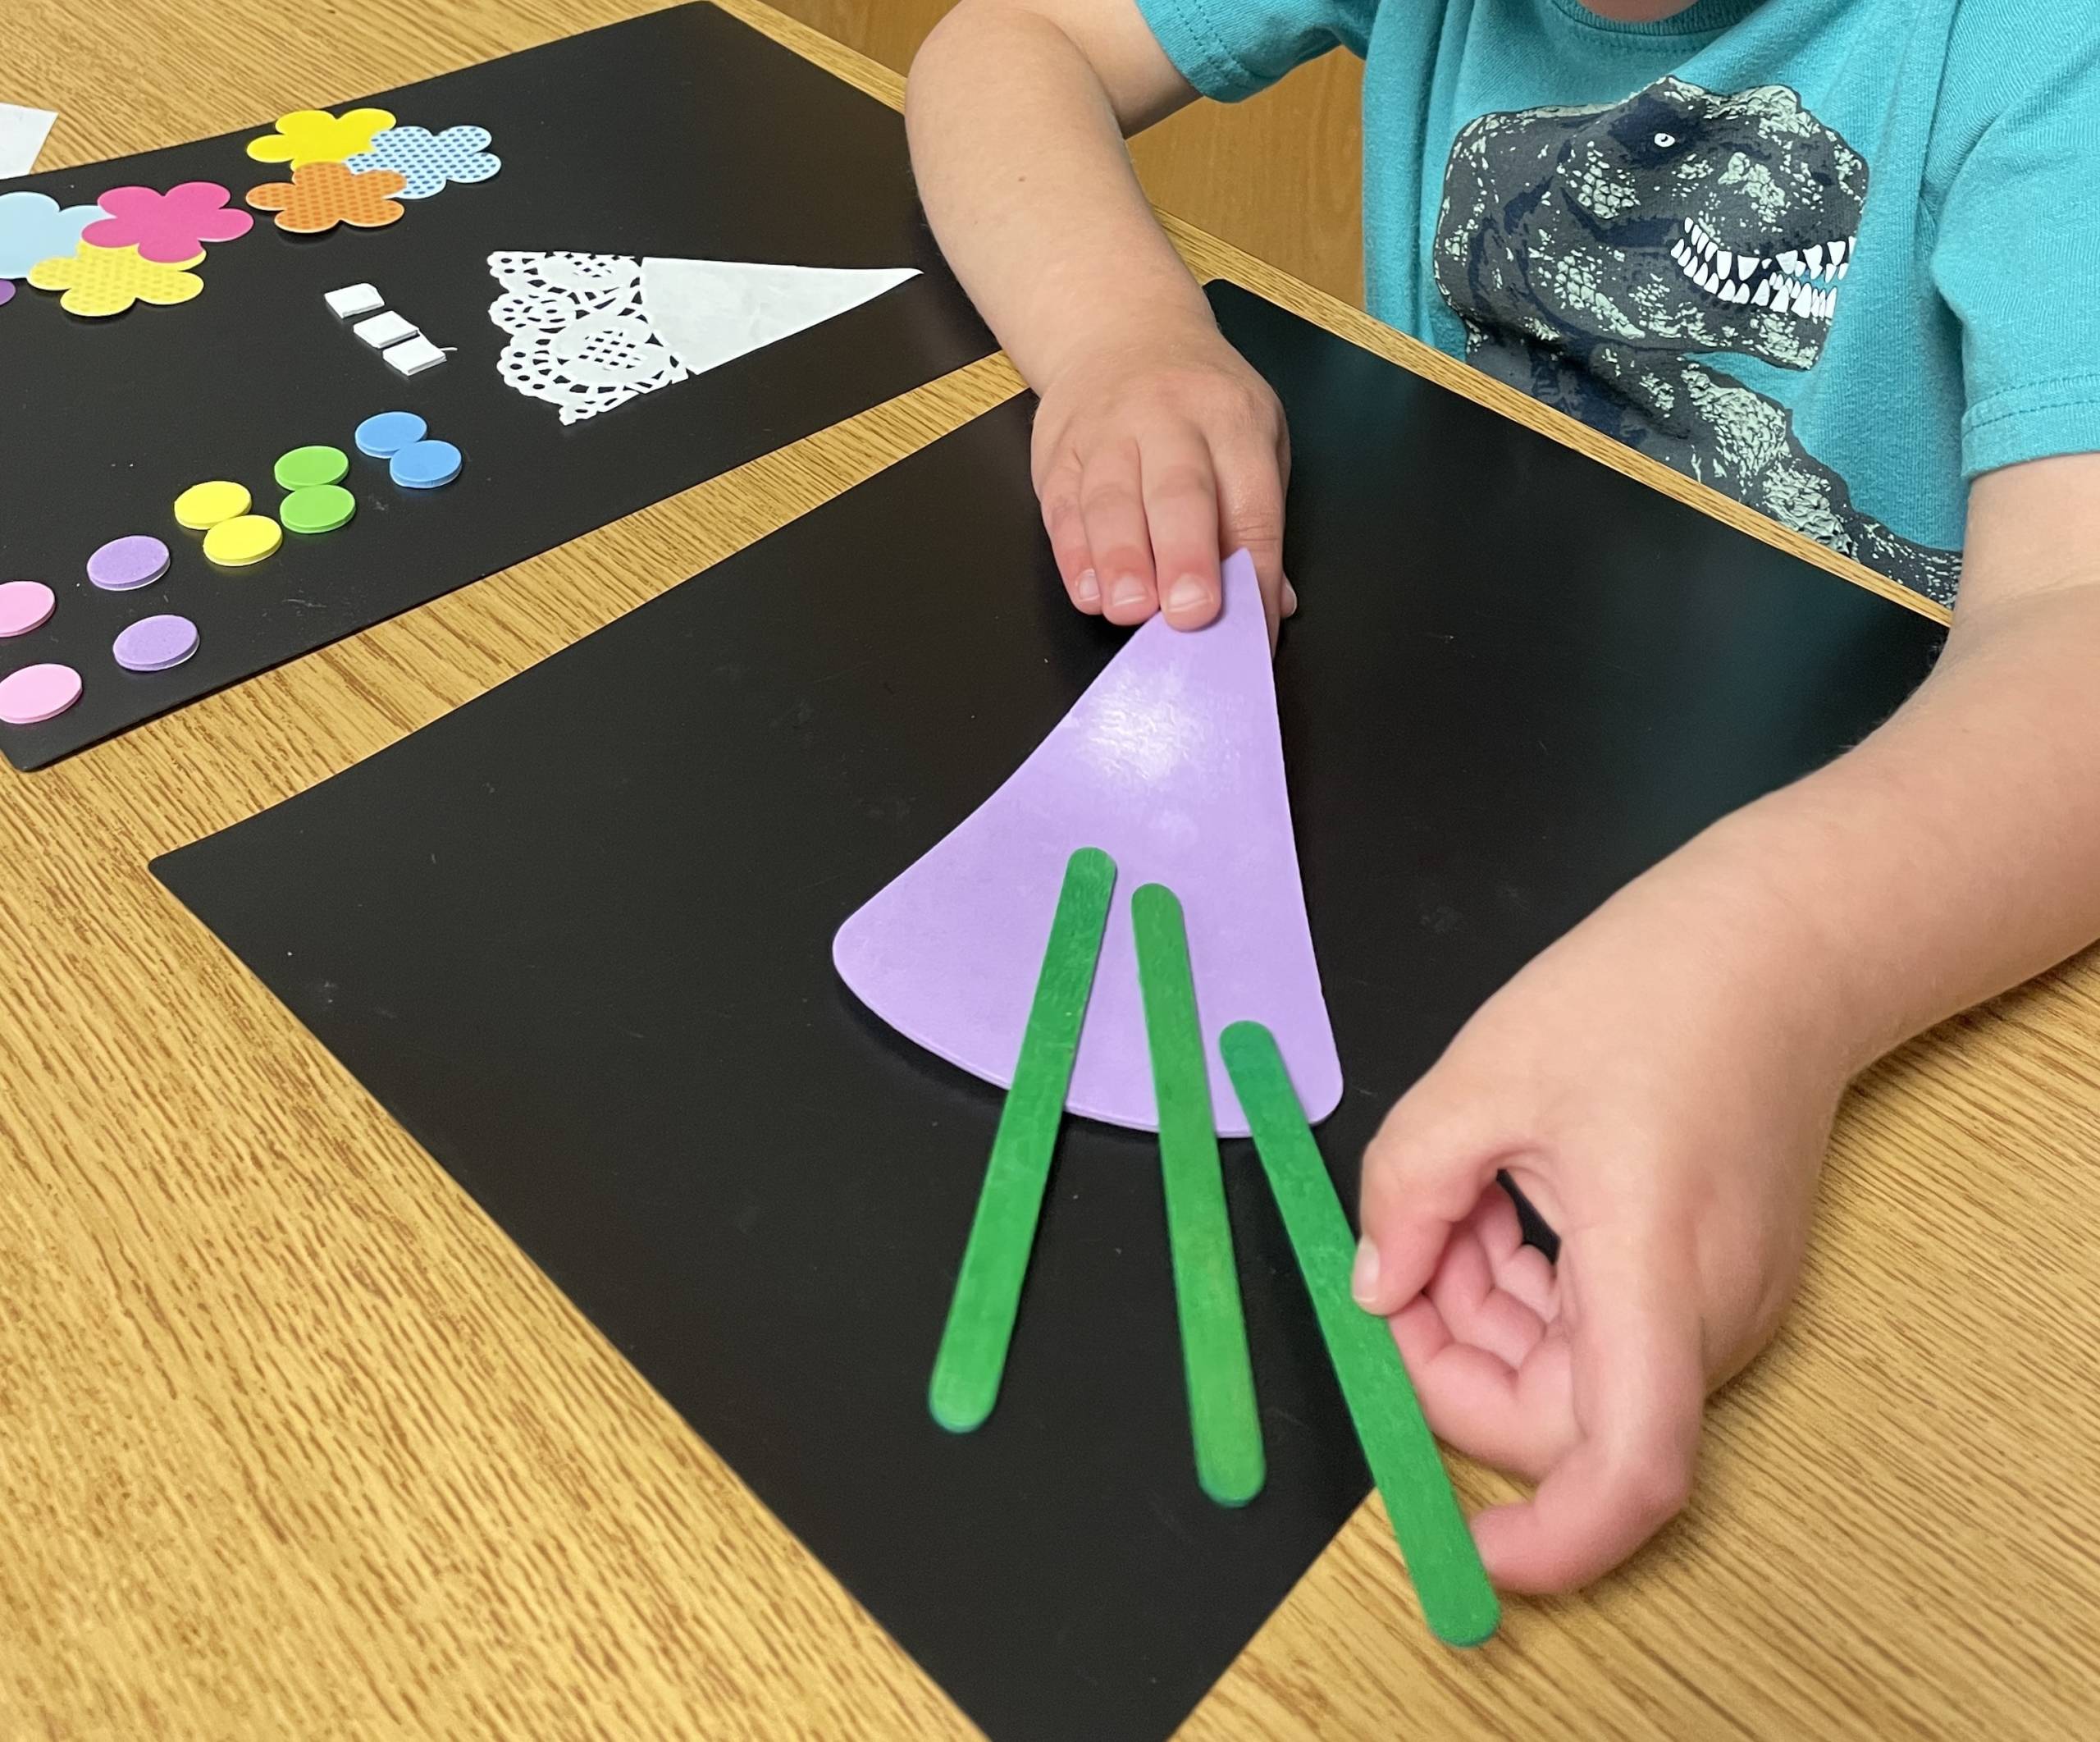 Student making a flower craft with paper, lace, textures, and popsicle sticks